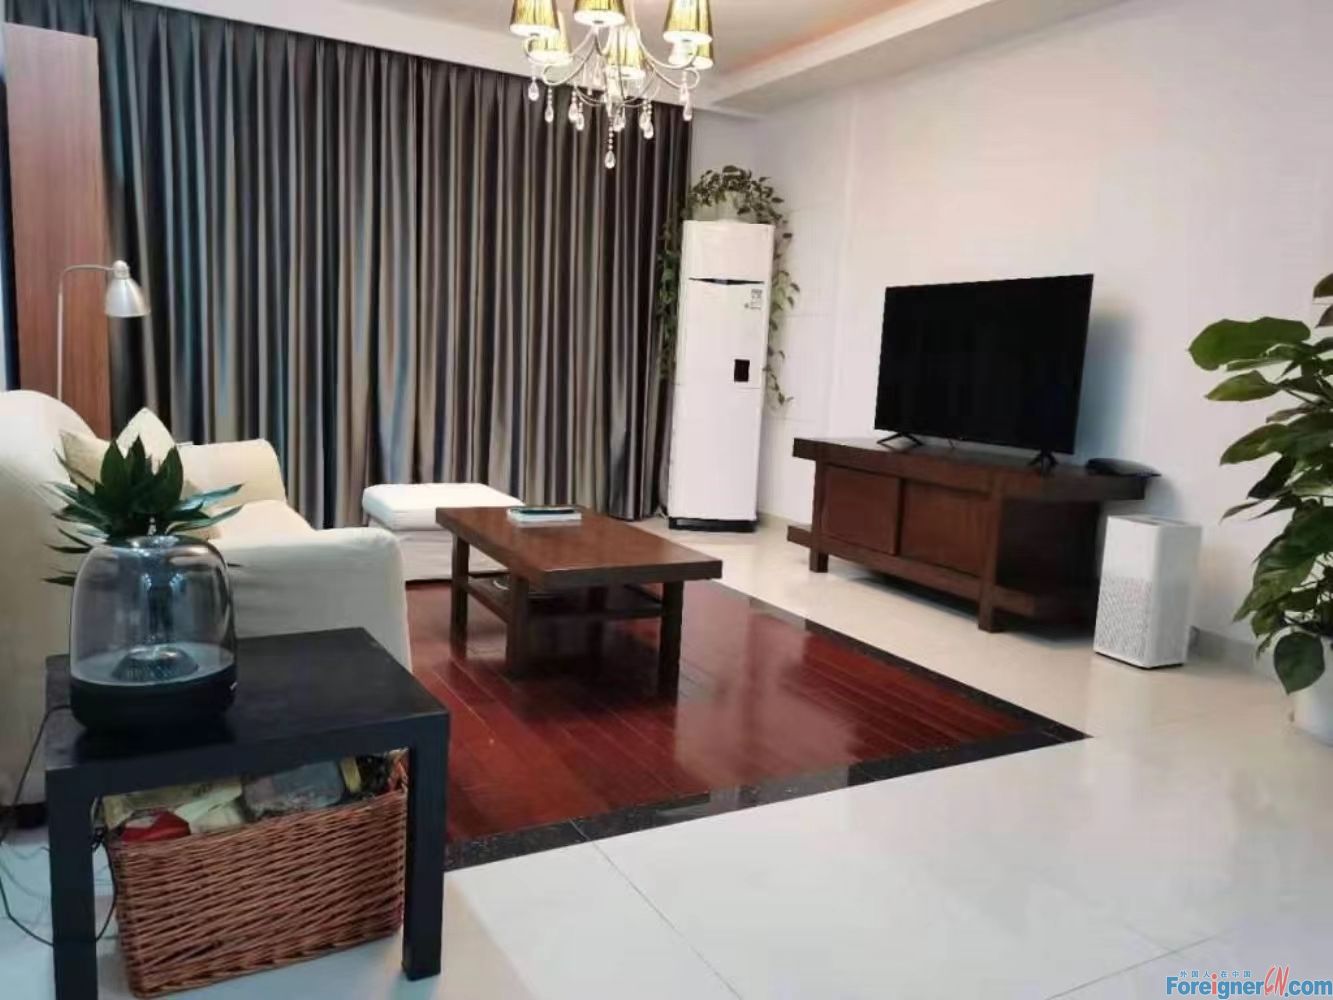 Great！！！ high value apartment rent in Suzhou /3 bedrooms and 2 bathrooms/Fully-furnished /restaurant neary by/Subway station 